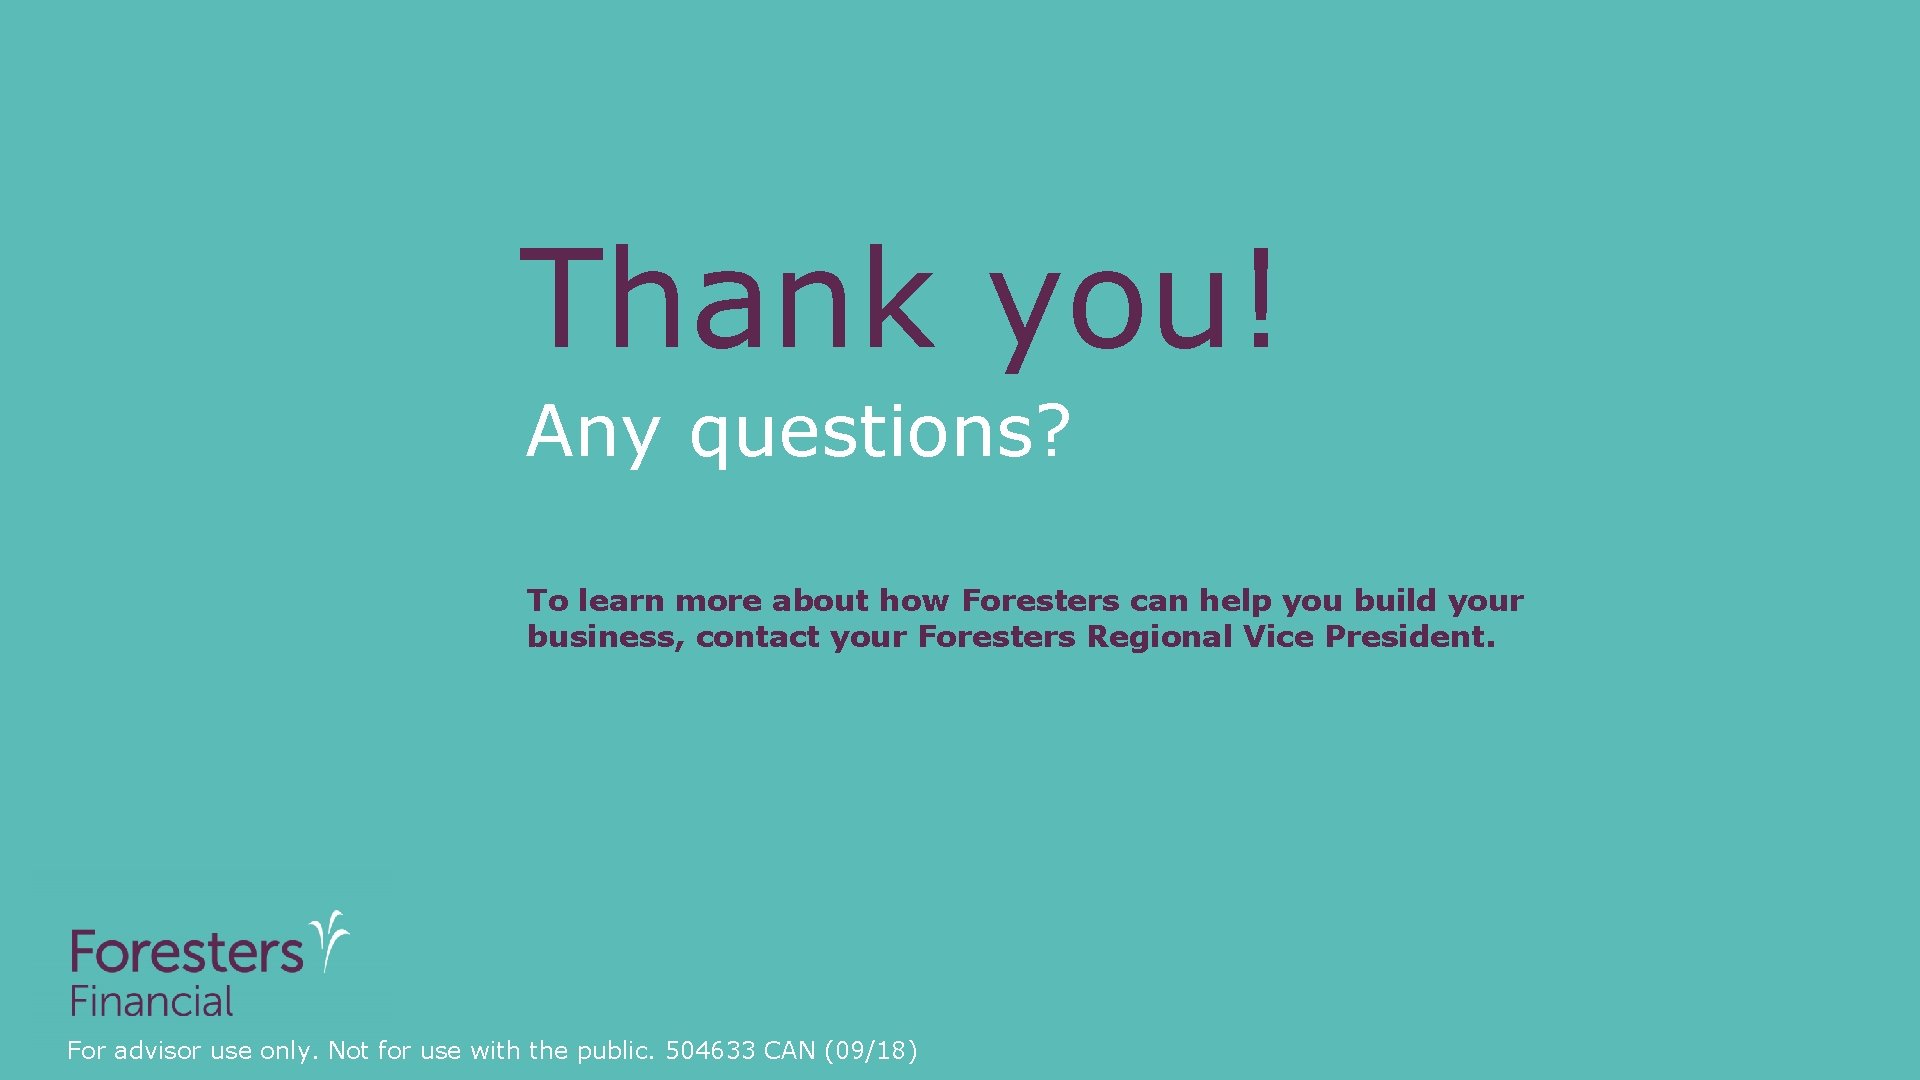 Thank you! Any questions? To learn more about how Foresters can help you build